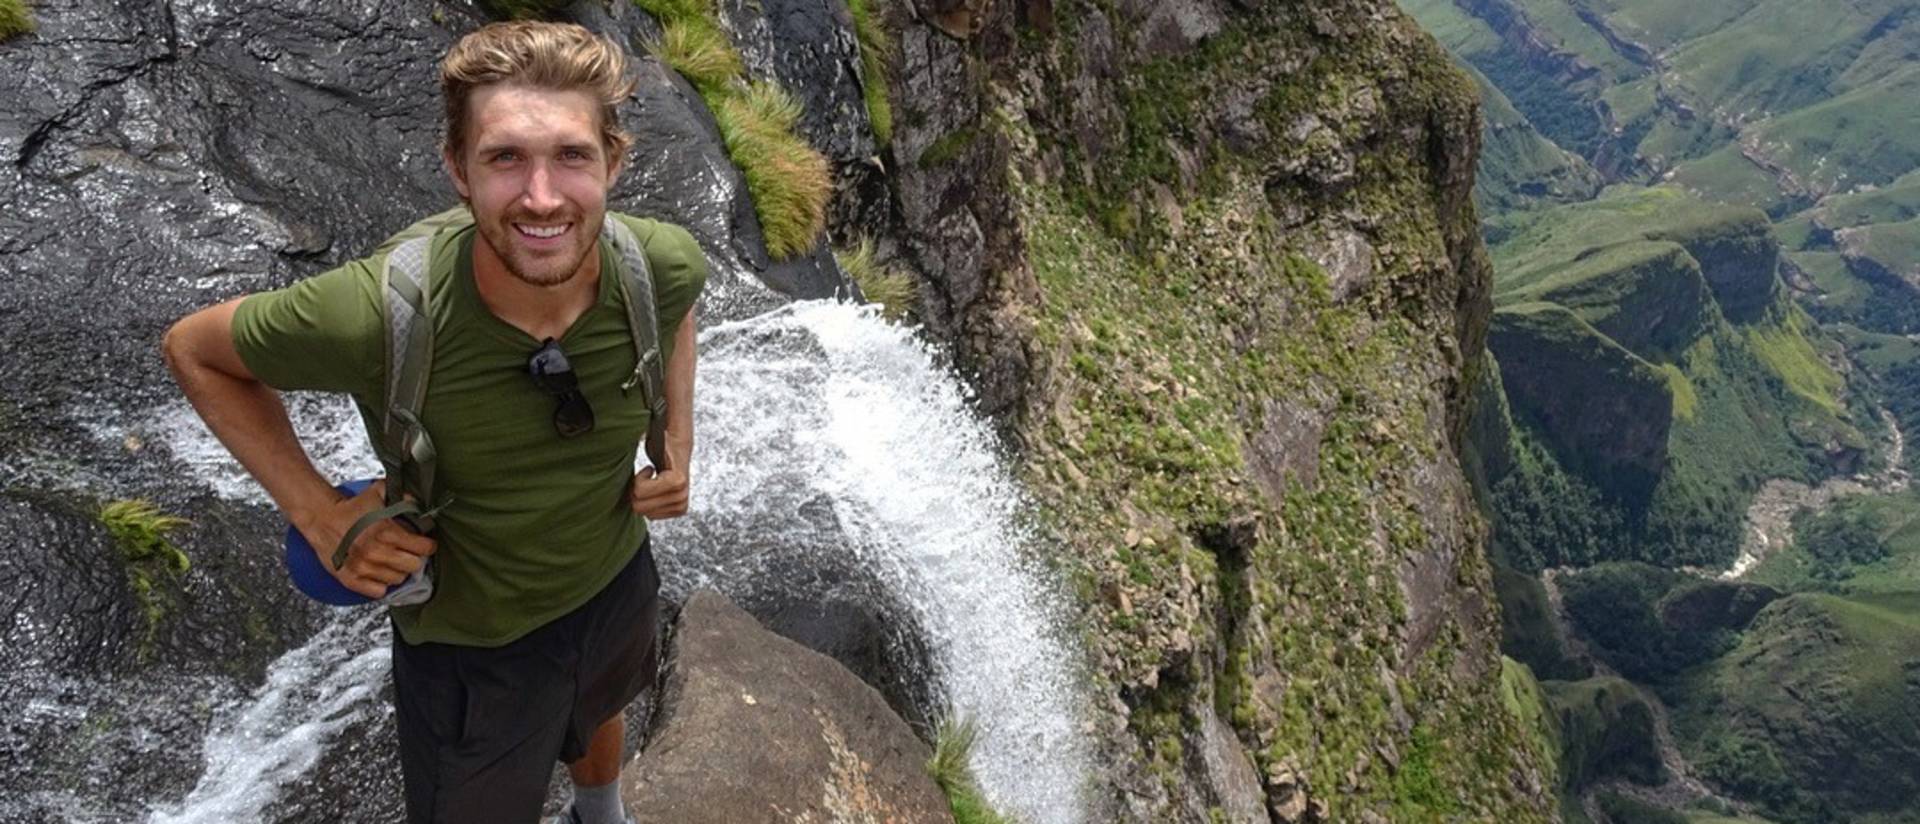 UW-Eau Claire alum Andy Kleist at Tugel Falls in South Africa